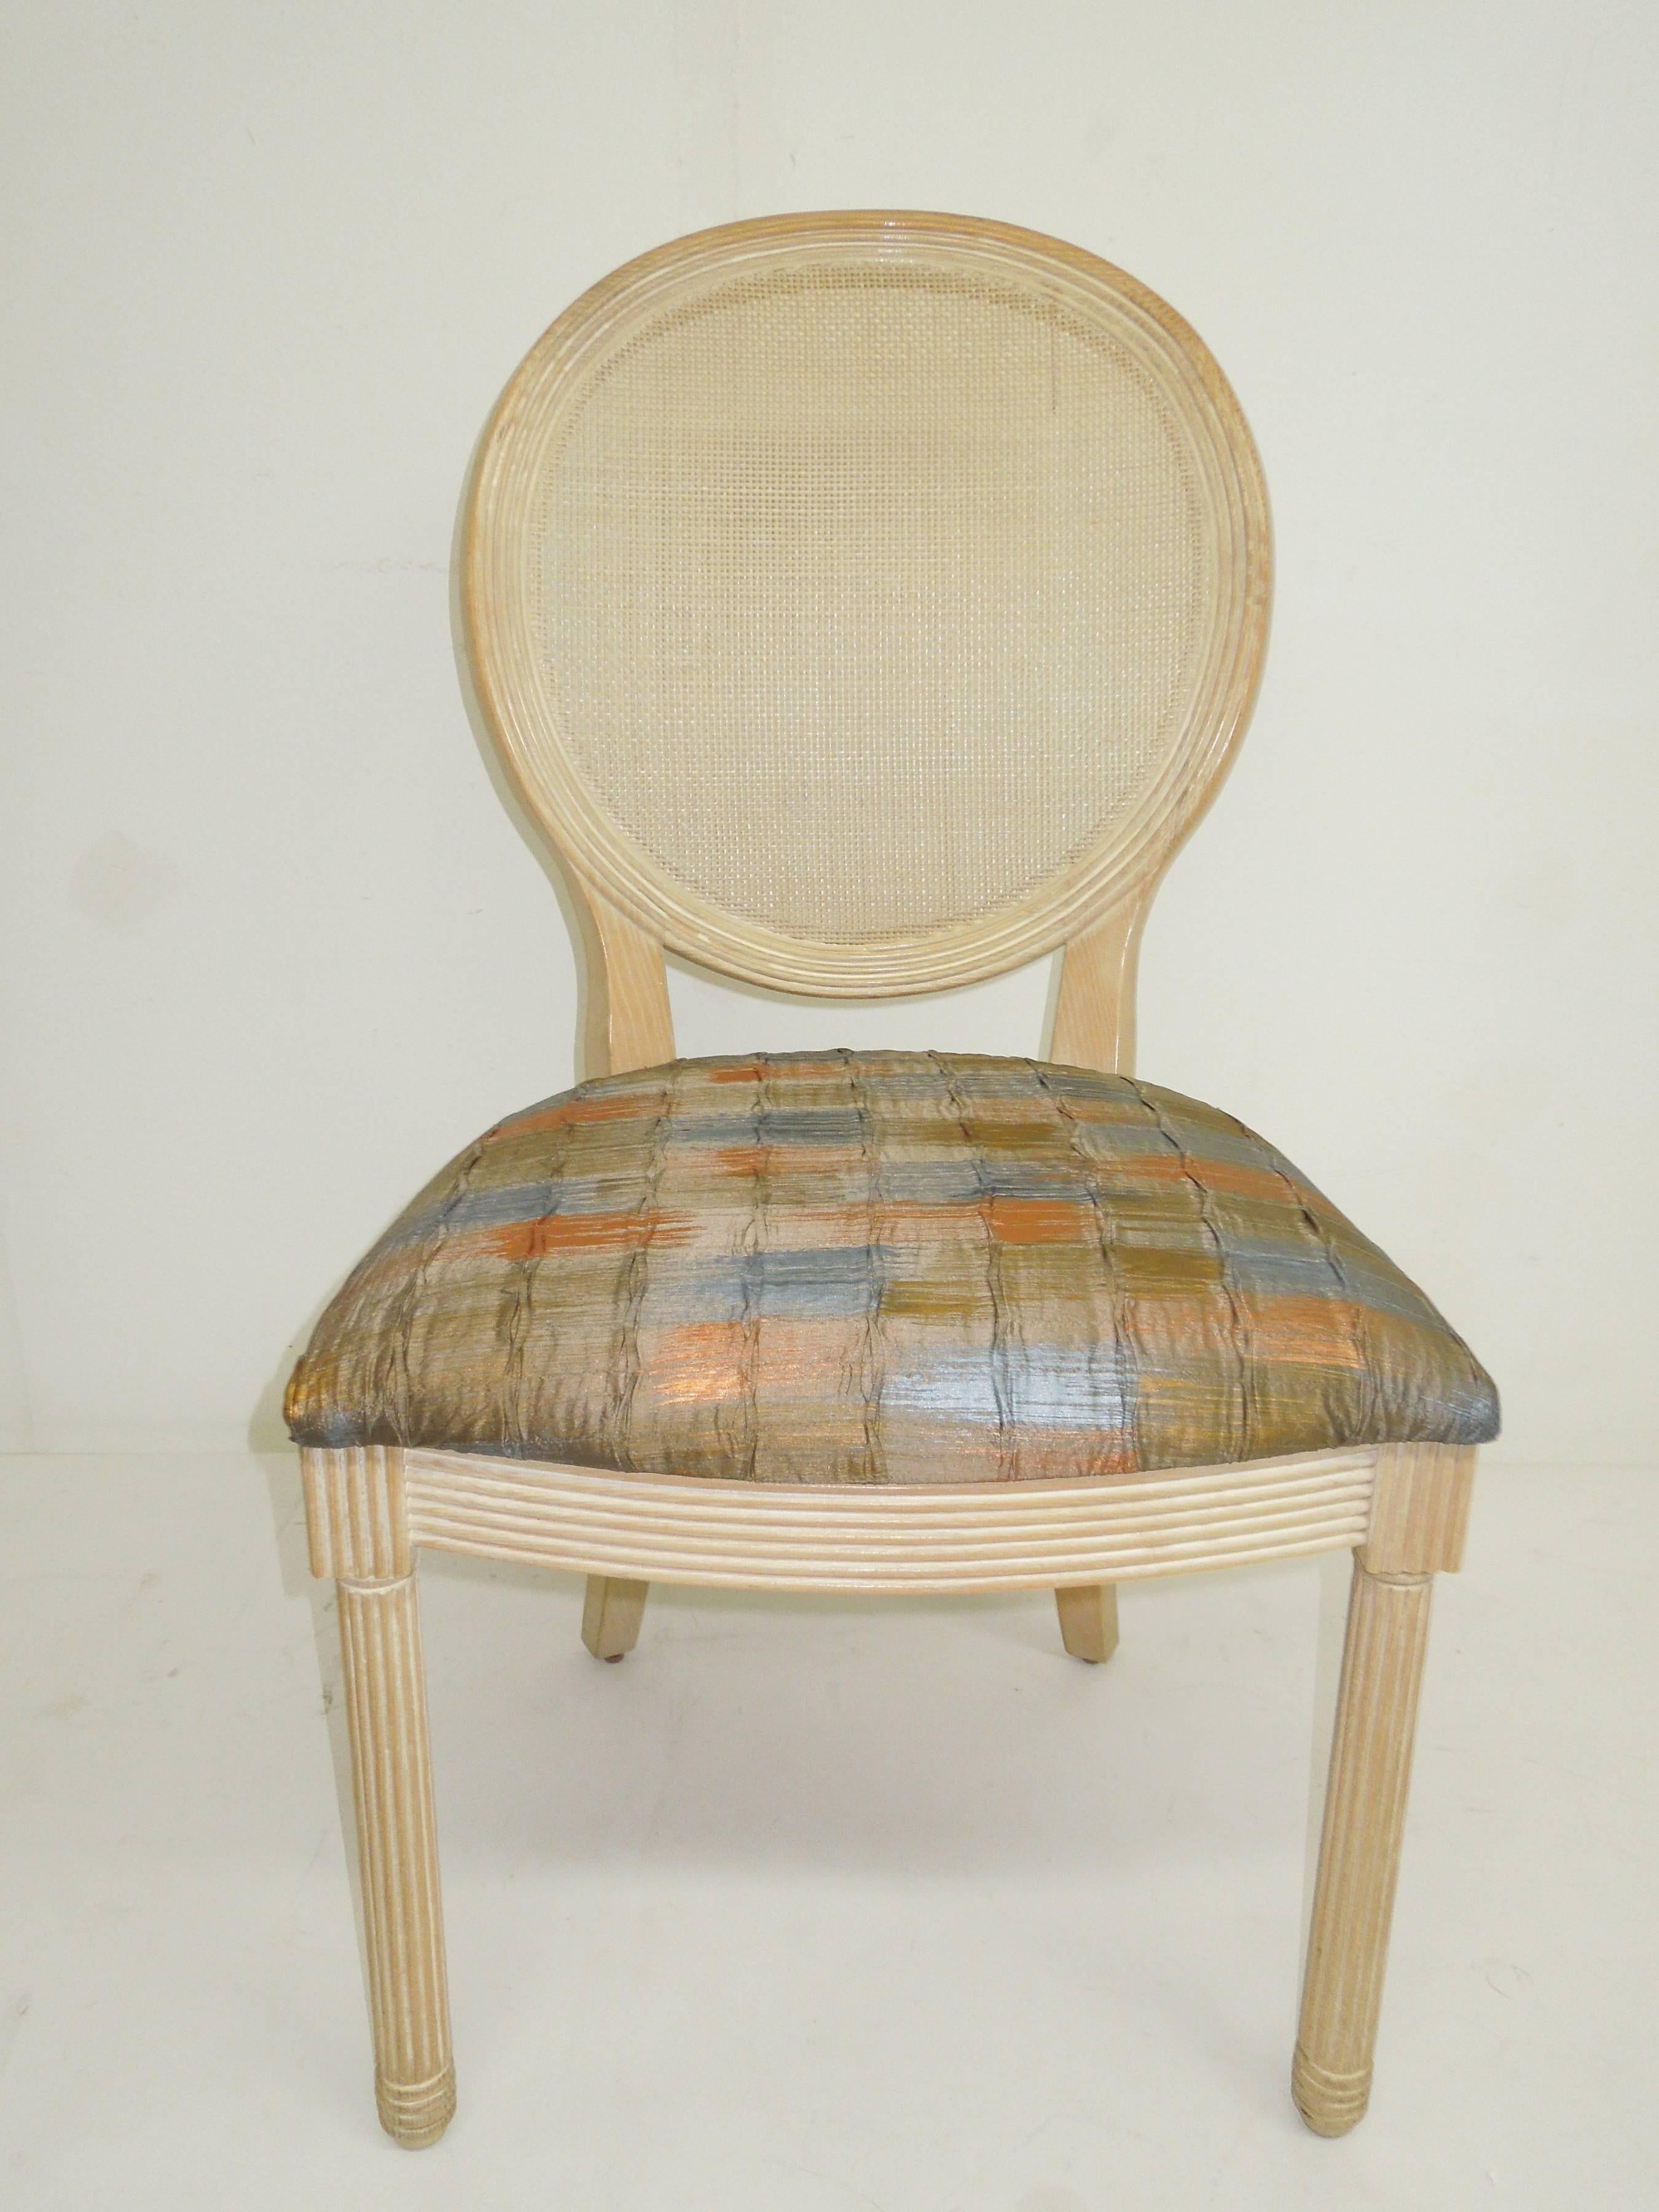 Jay Spectre's interpretation of a Classic Louis XVI form. Set of four dining or game chairs for Century Furniture, circa 1984. In original Iconic cerused oak finish. Woven cane backs. Newly reupholstered in European plaid rayon metallic pleated